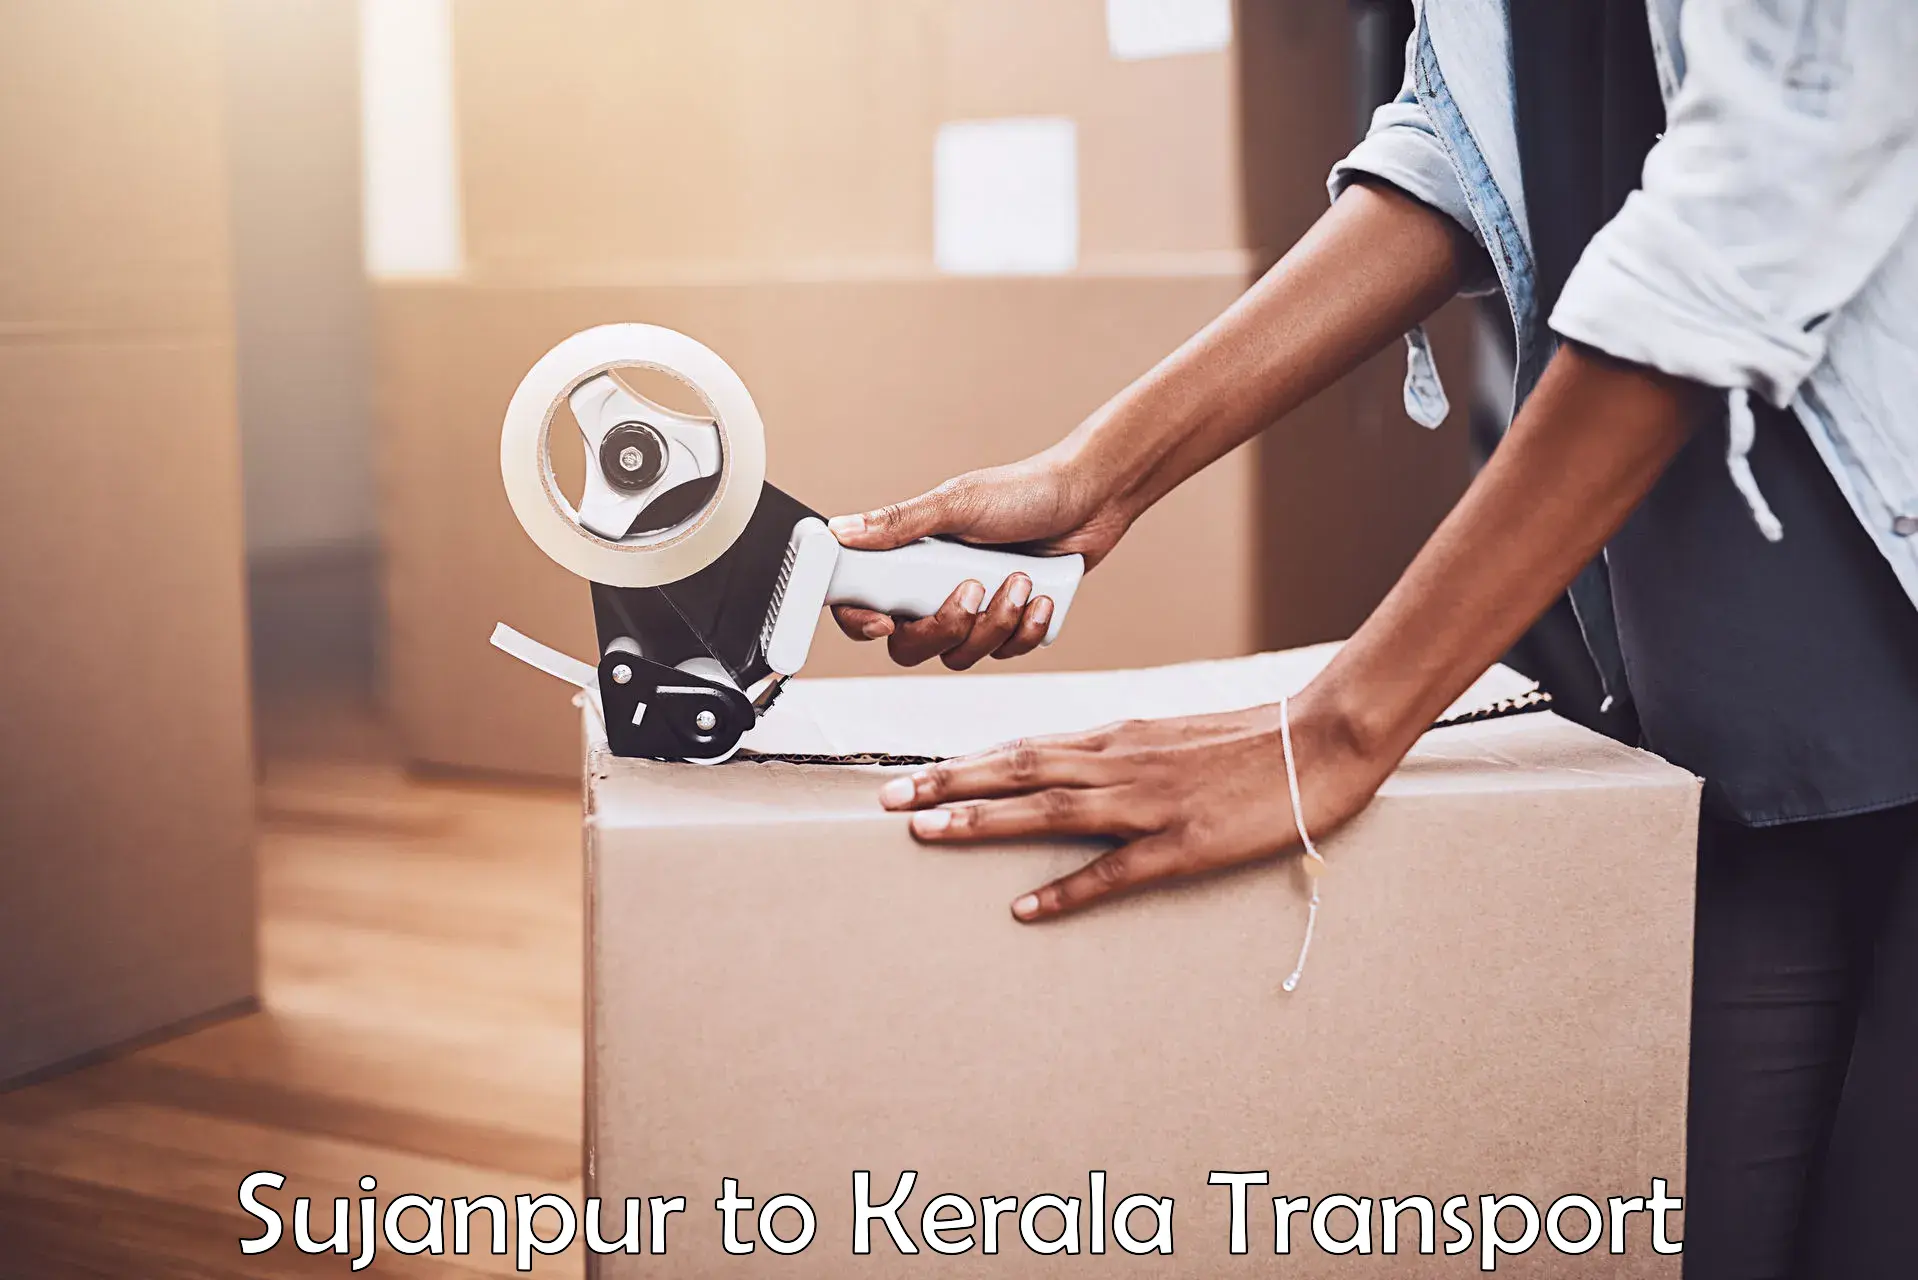 Truck transport companies in India Sujanpur to Nallepilly